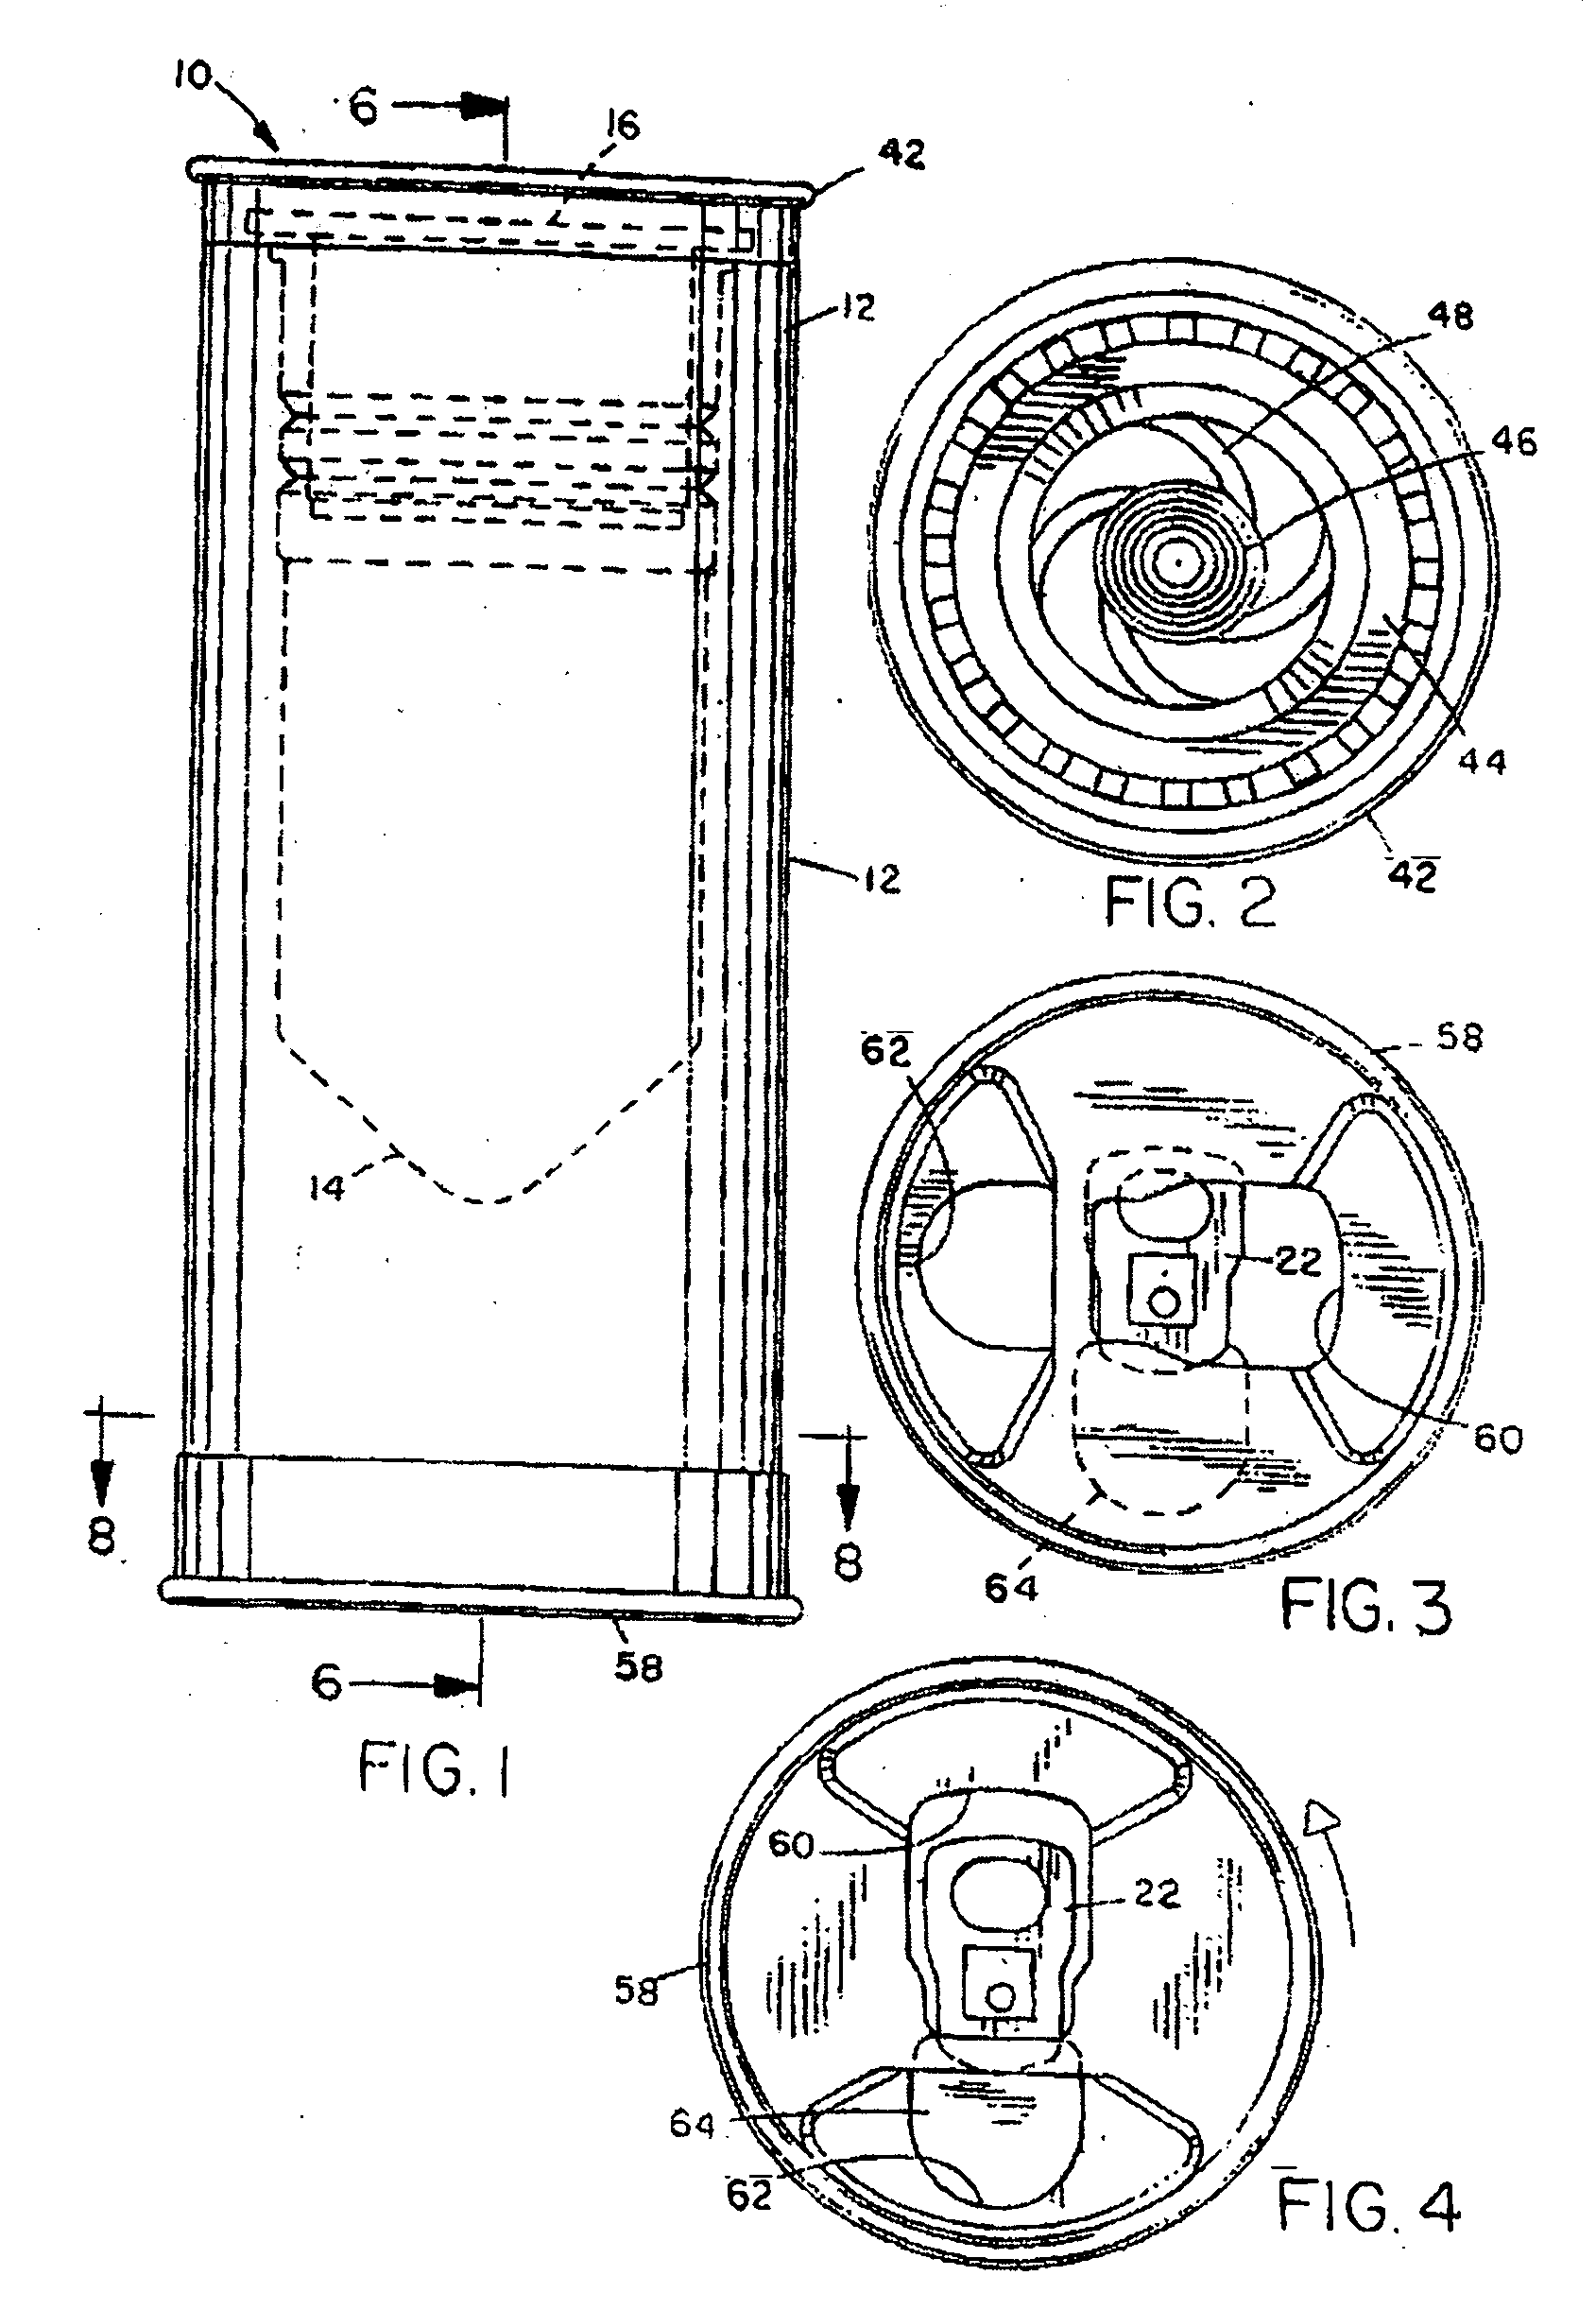 Container with module for heating or cooling the contents